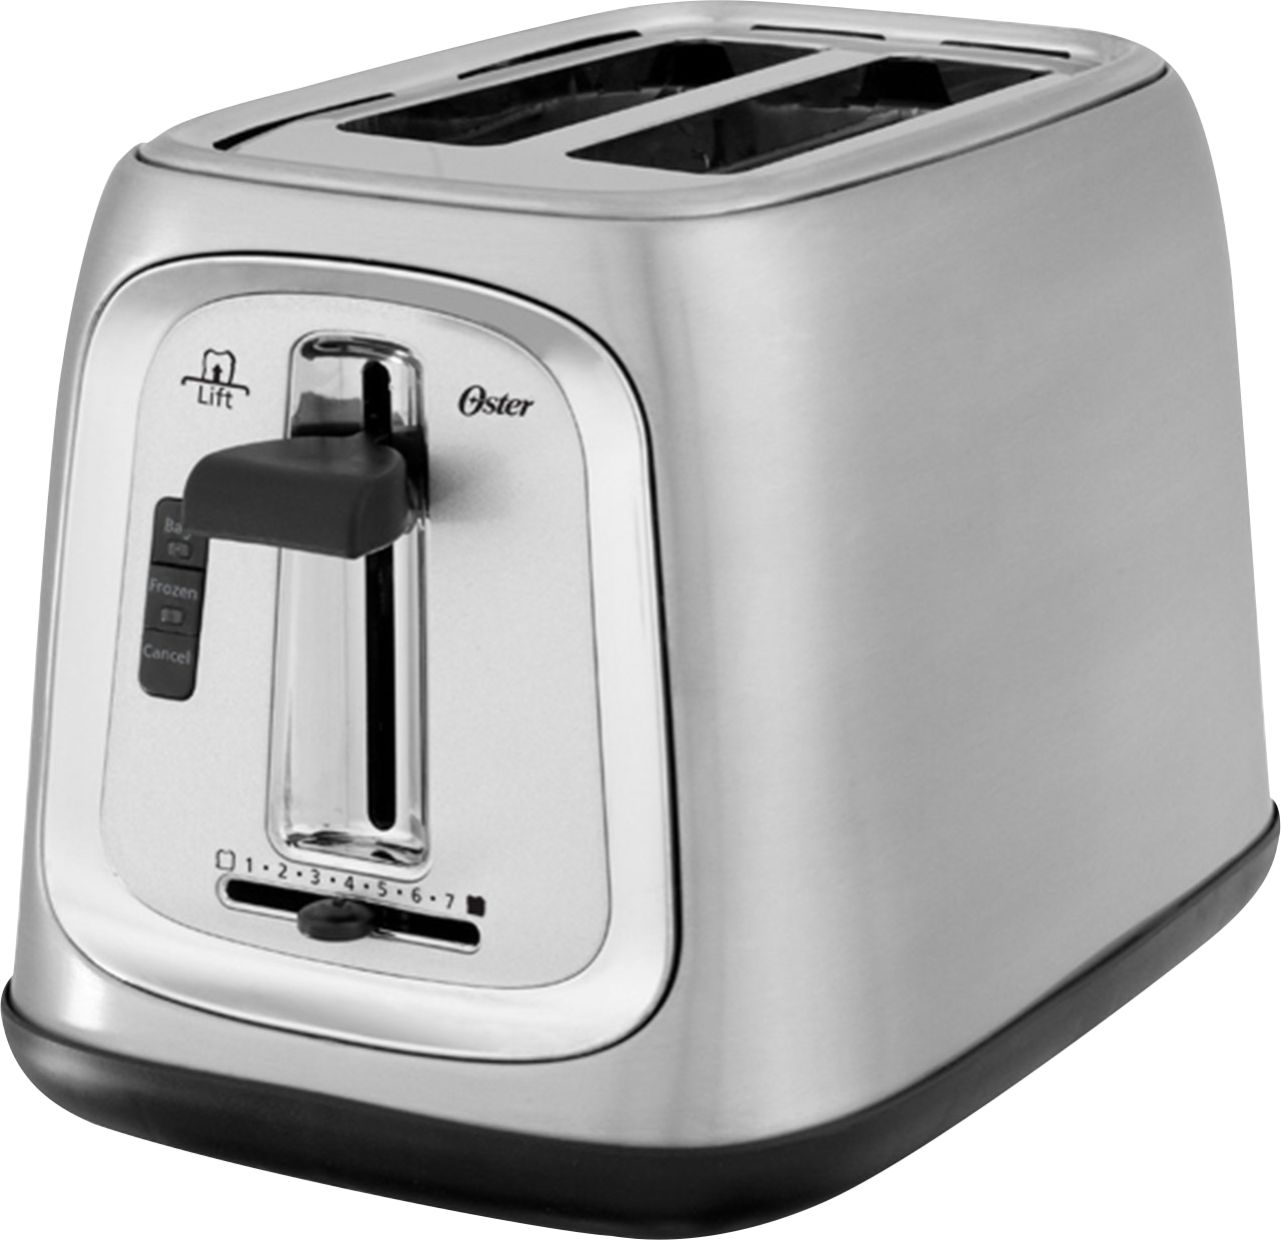 Oster Precision Select 2 Slice Toaster, Silver